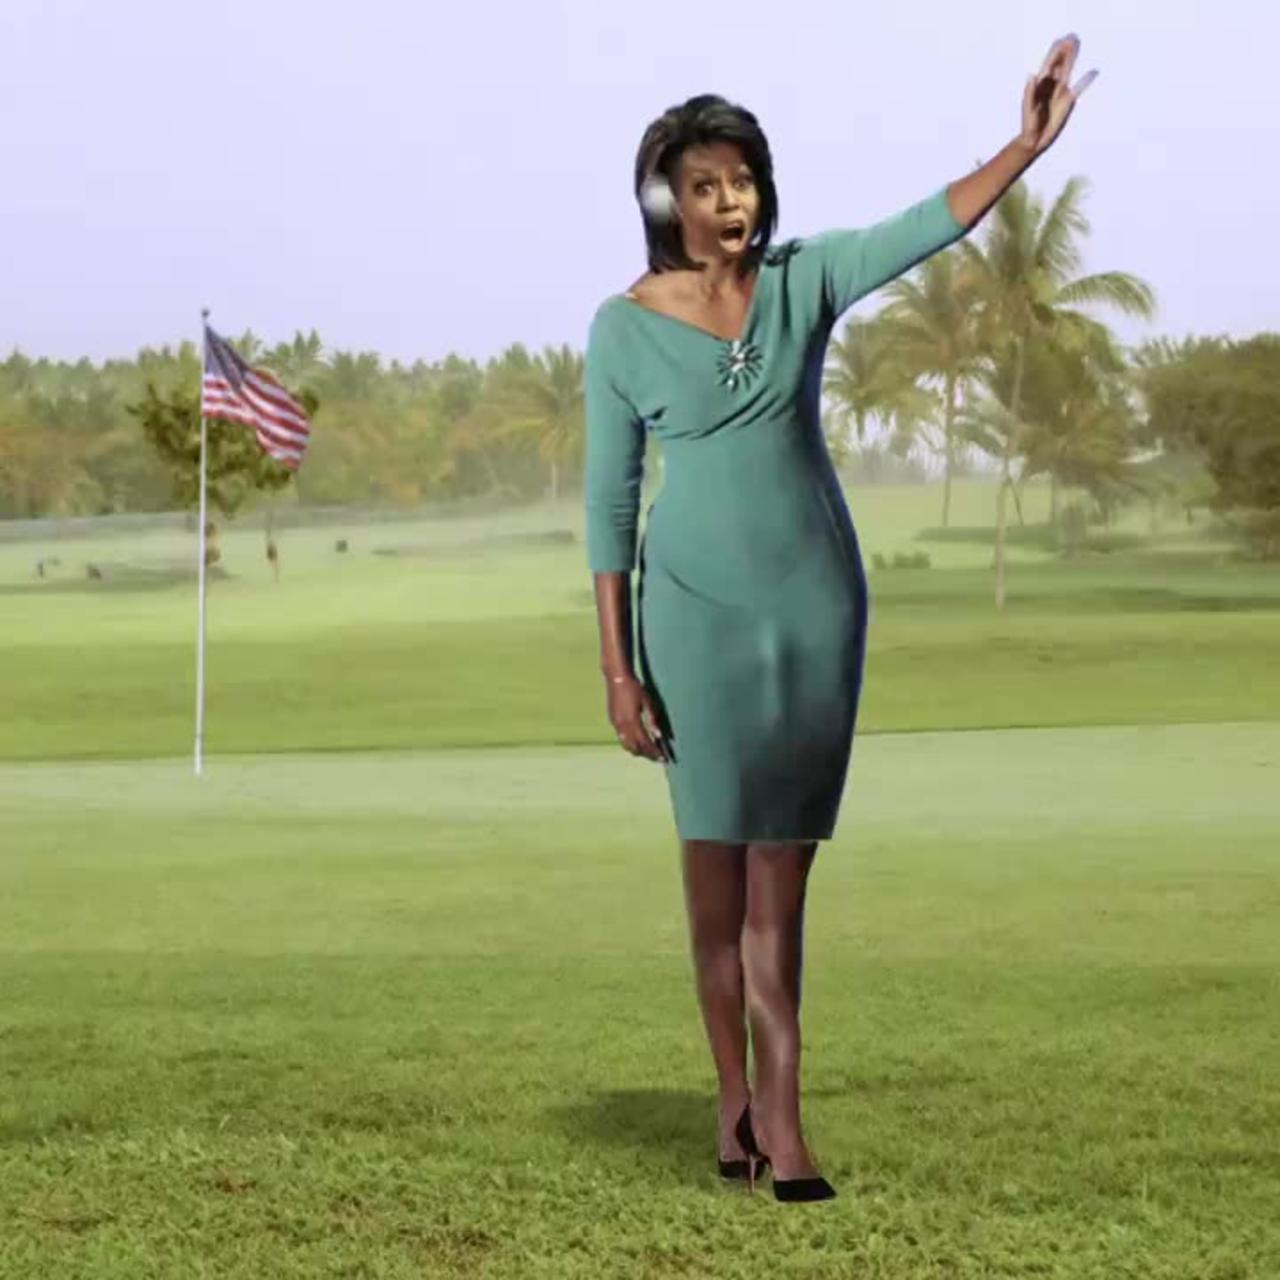 Trump Plays Golf With Michelle Obama